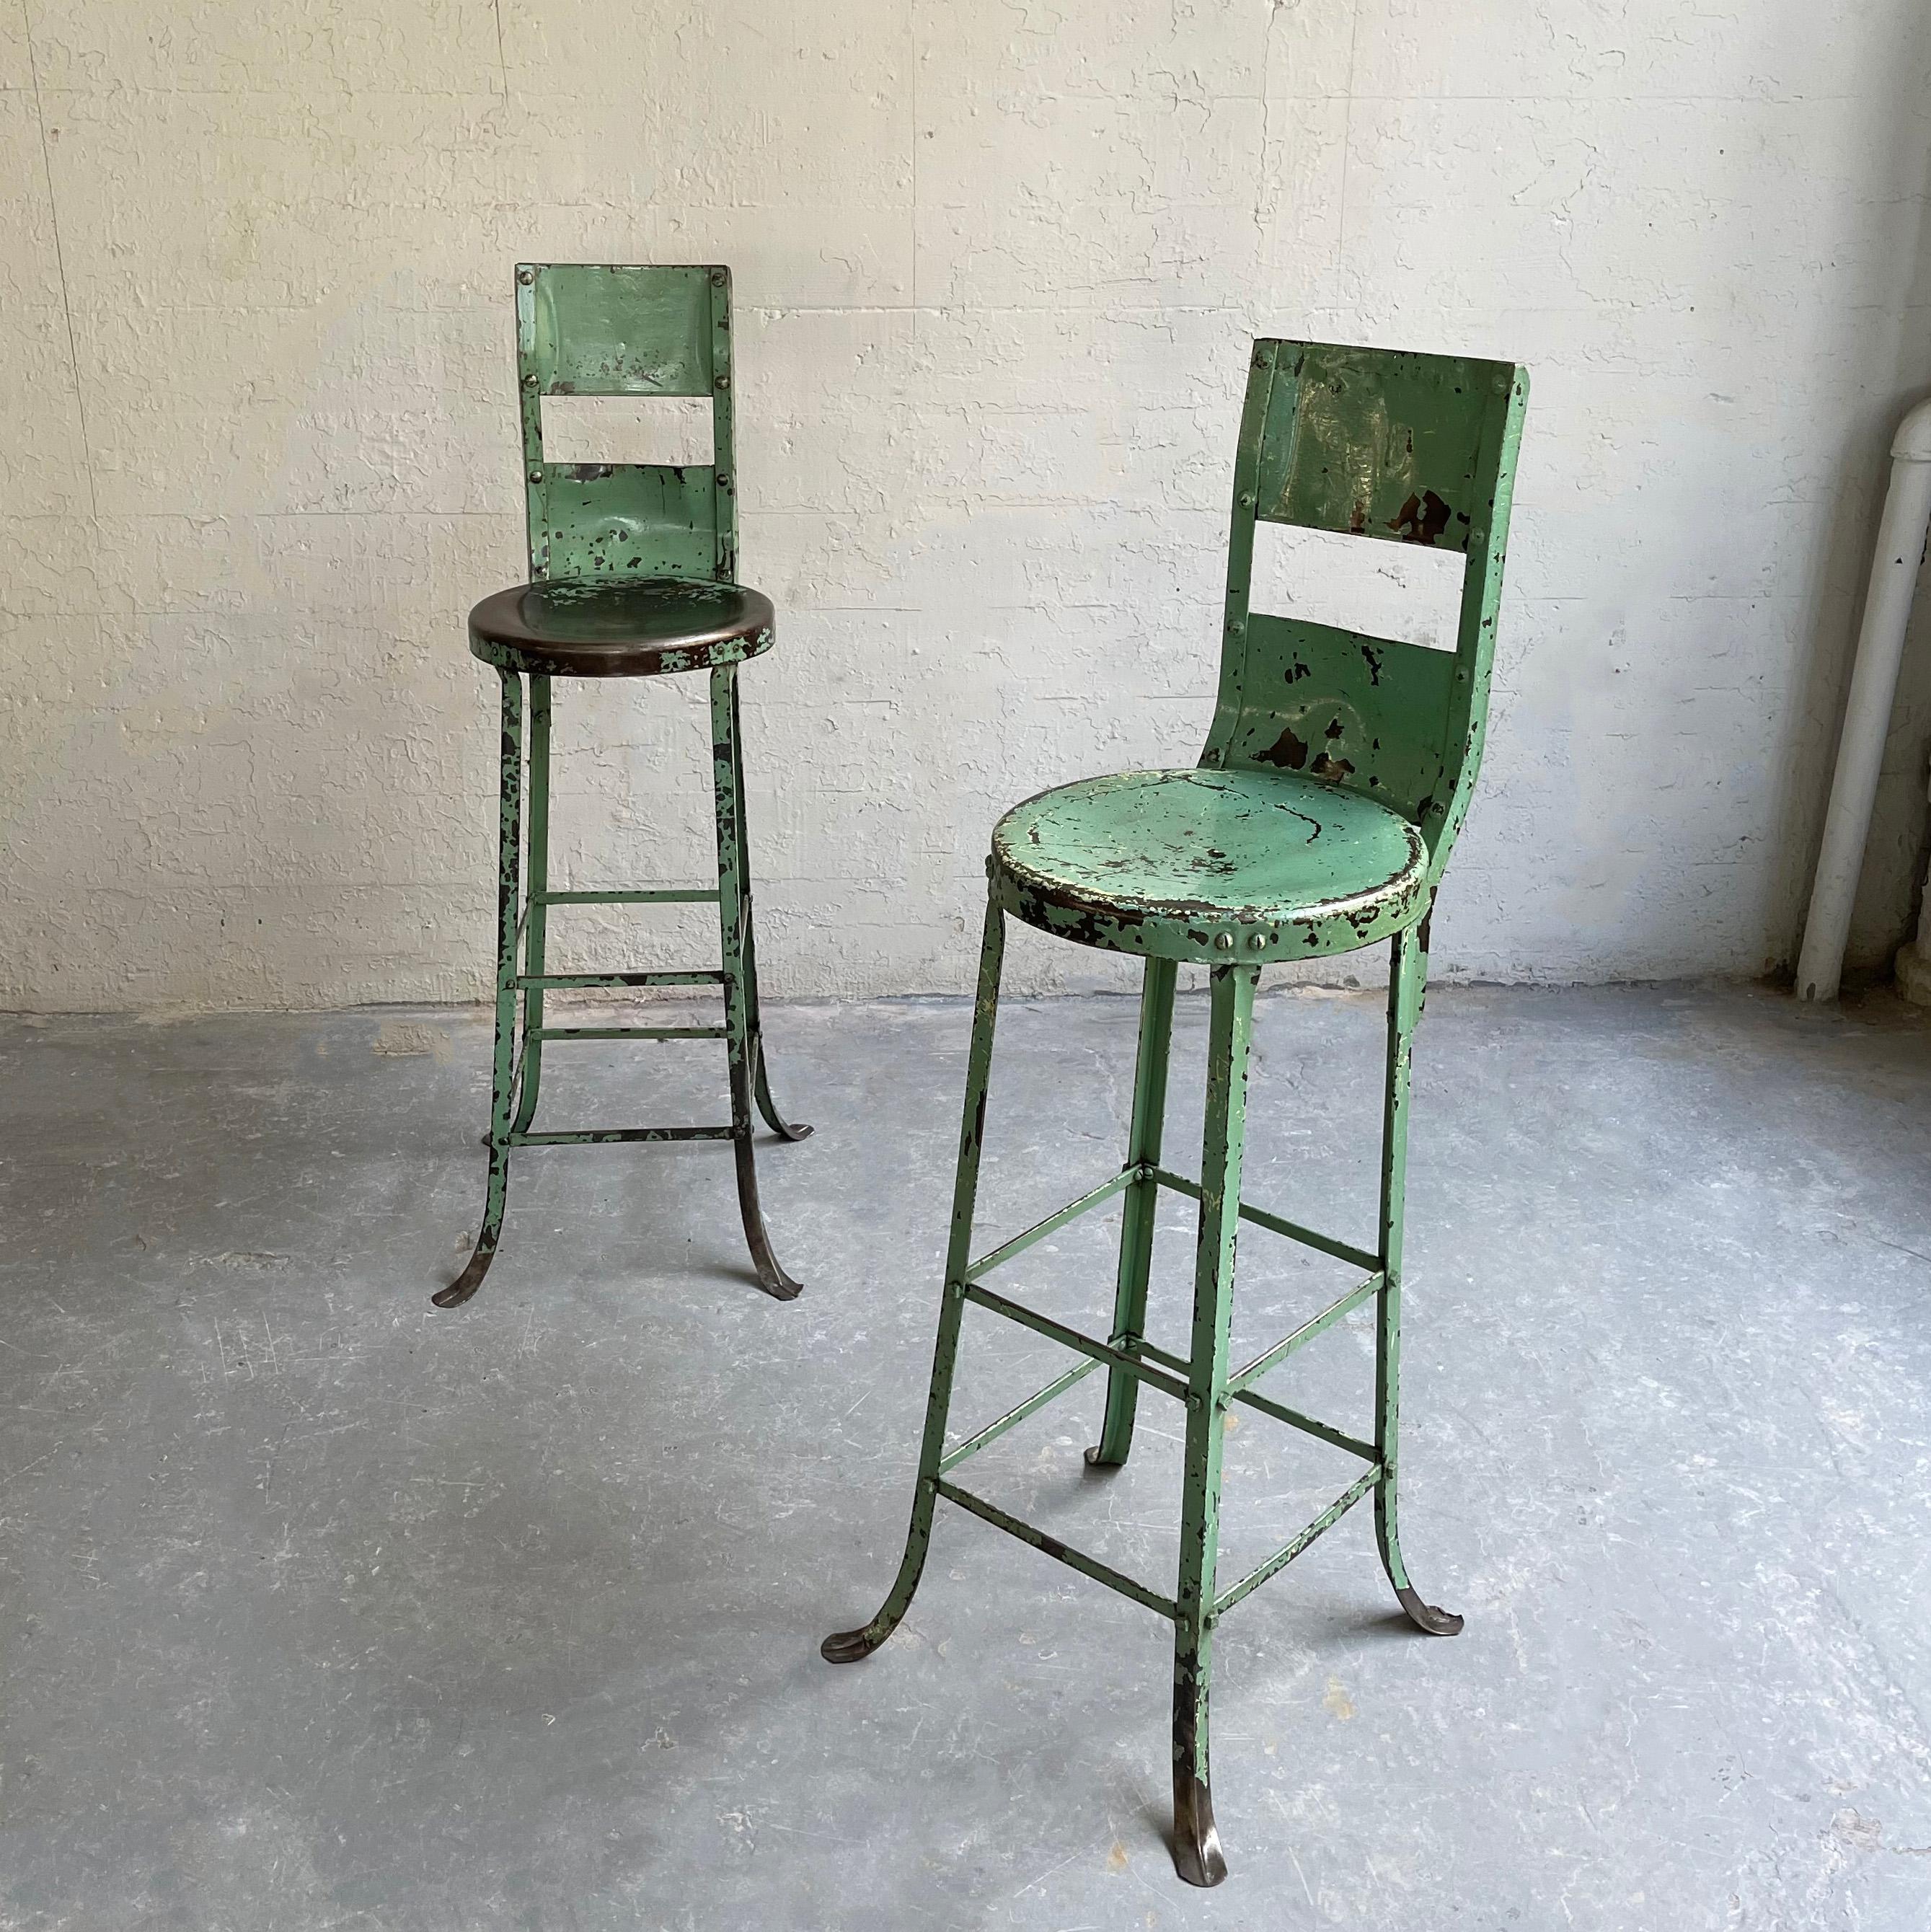 Tall, industrial, early 20th century, light green, painted steel, shop stools feature their wonderful, work-worn original patina.